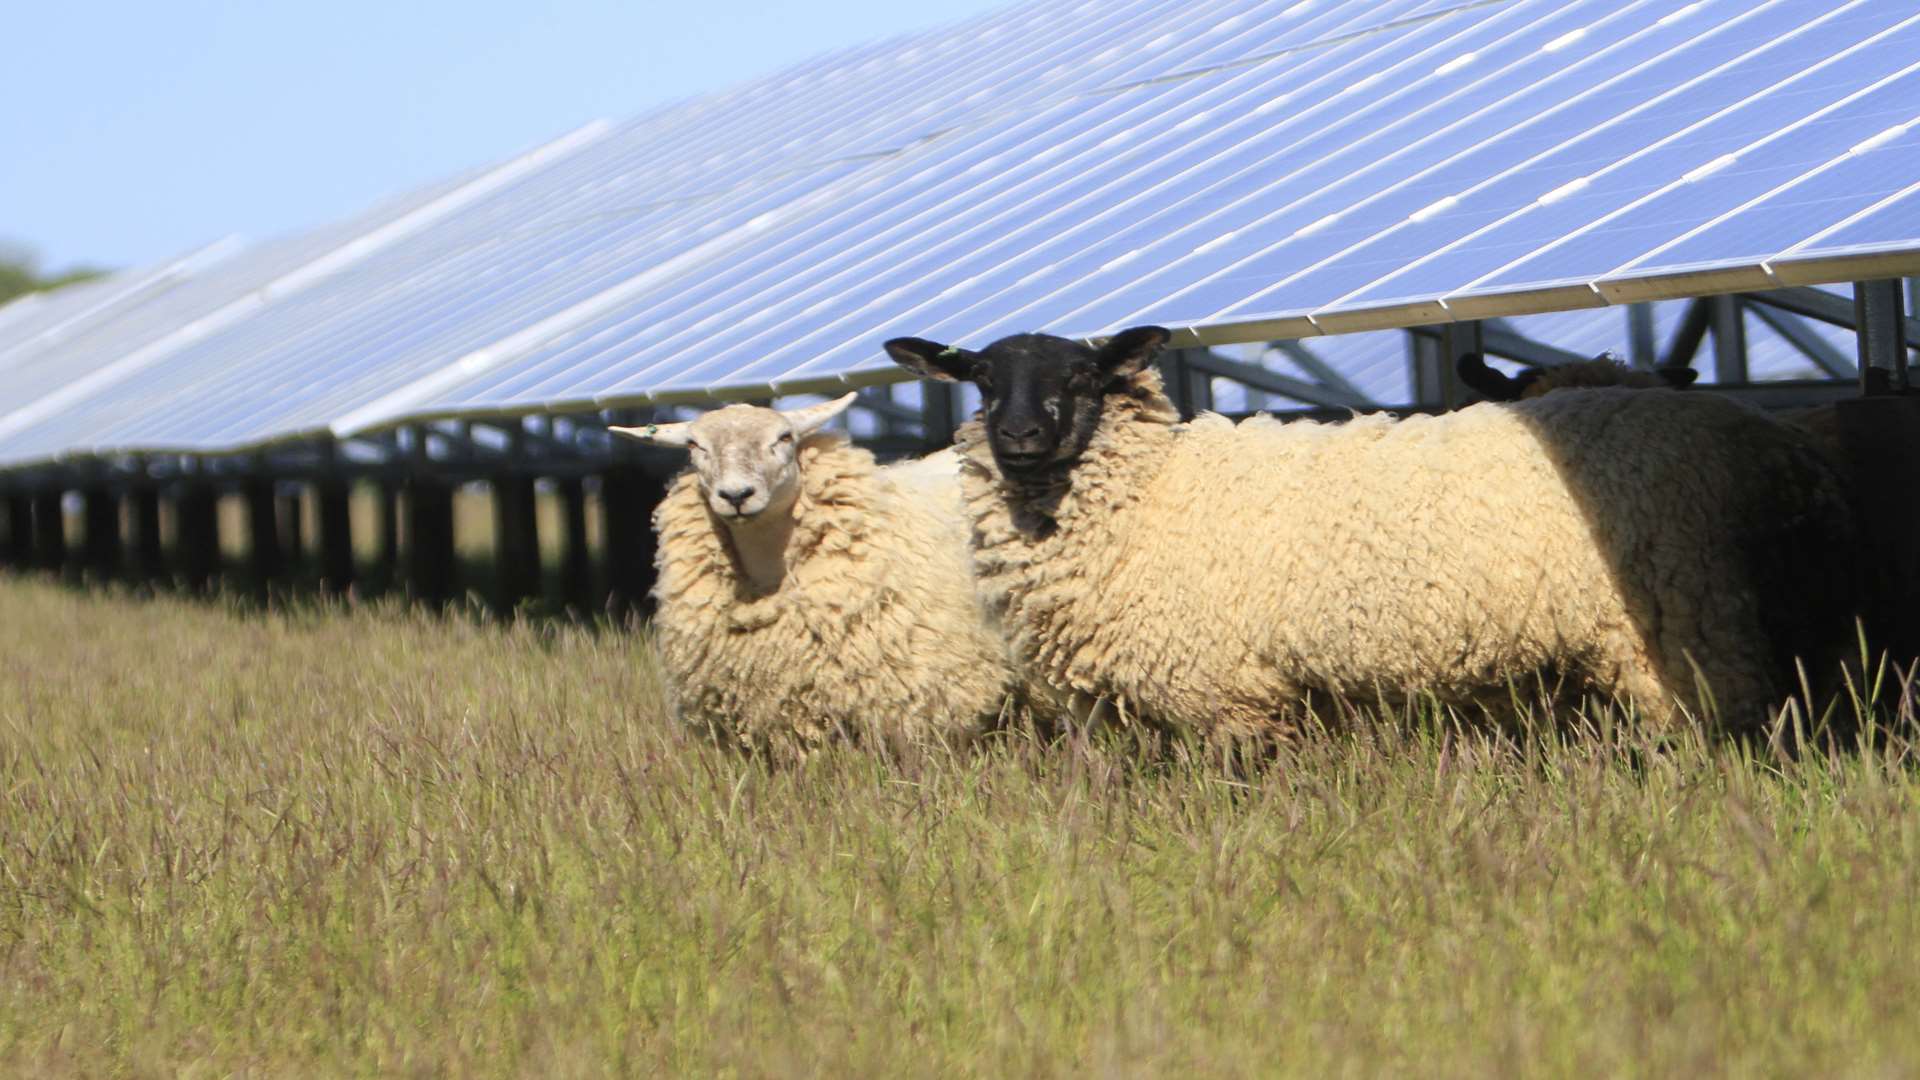 Sheep could still graze among the solar panels